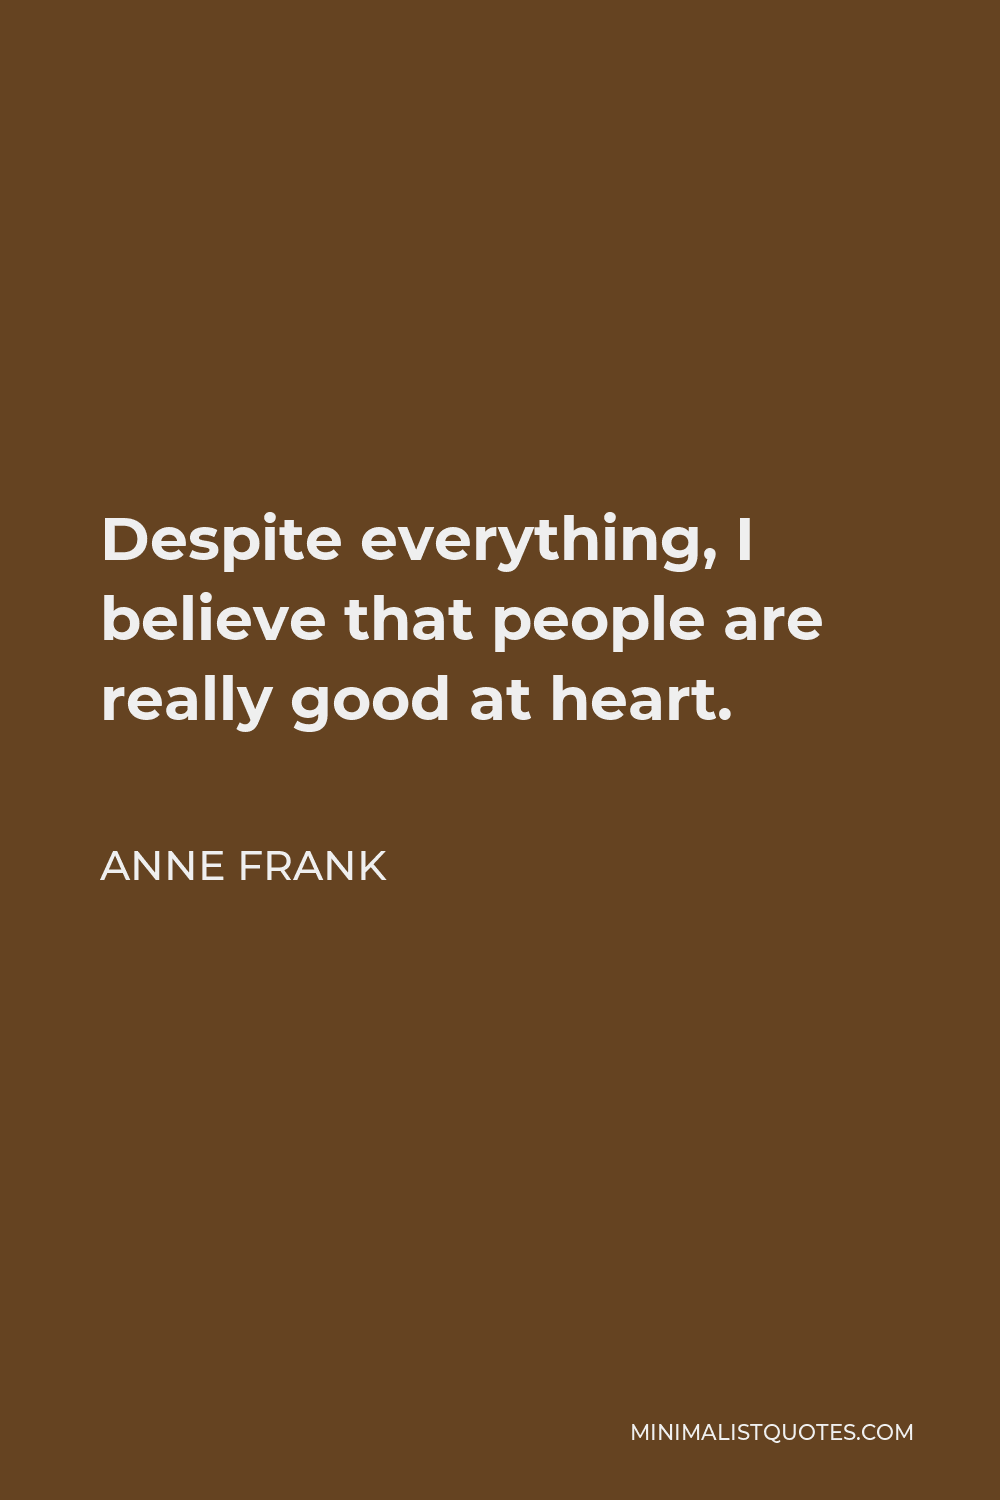 Anne Frank Quote - Despite everything, I believe that people are really good at heart.